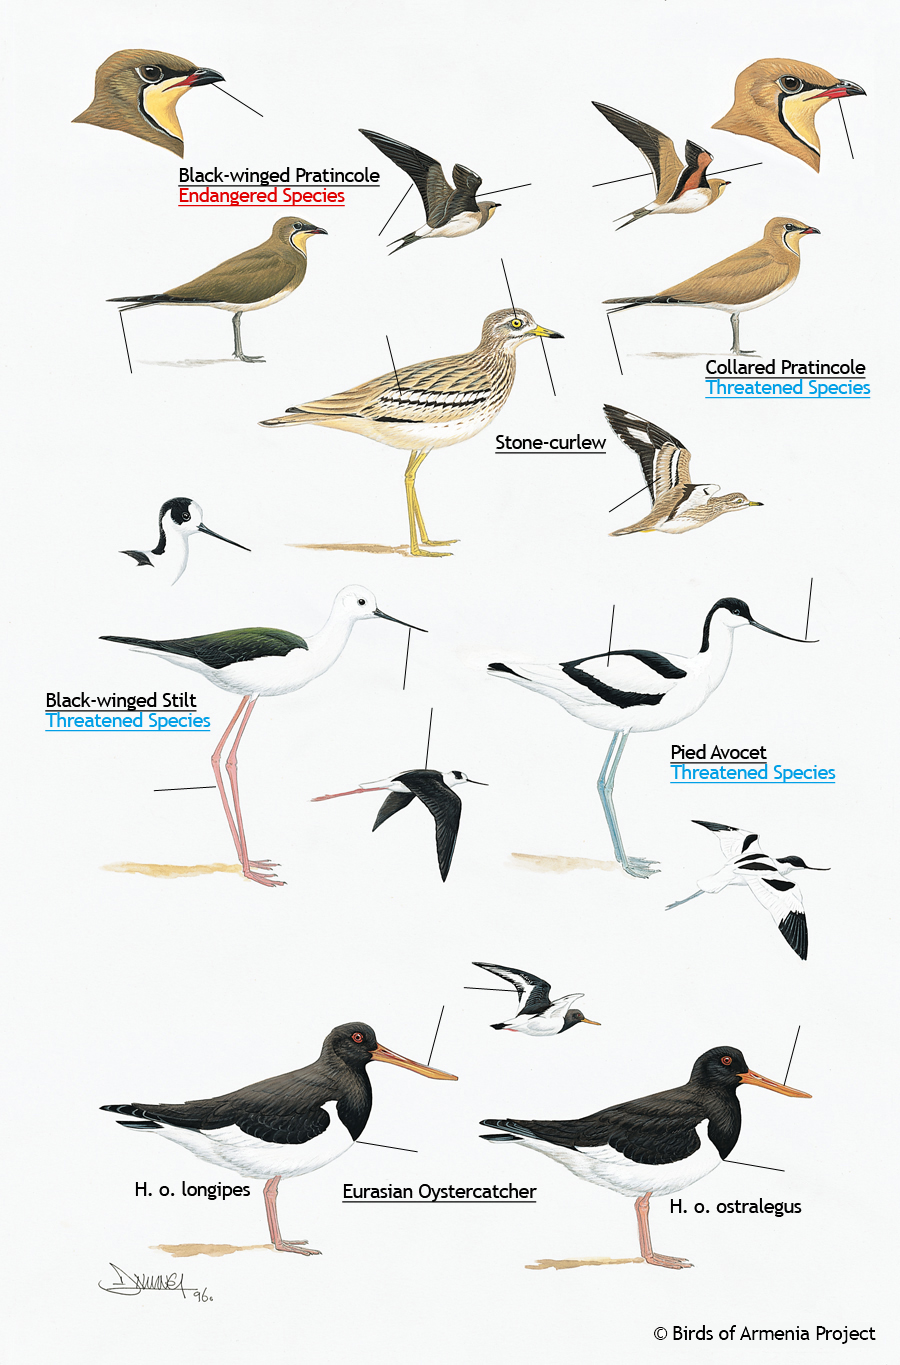 Pratincoles, curlews, avocets, stilts and oystercatchers